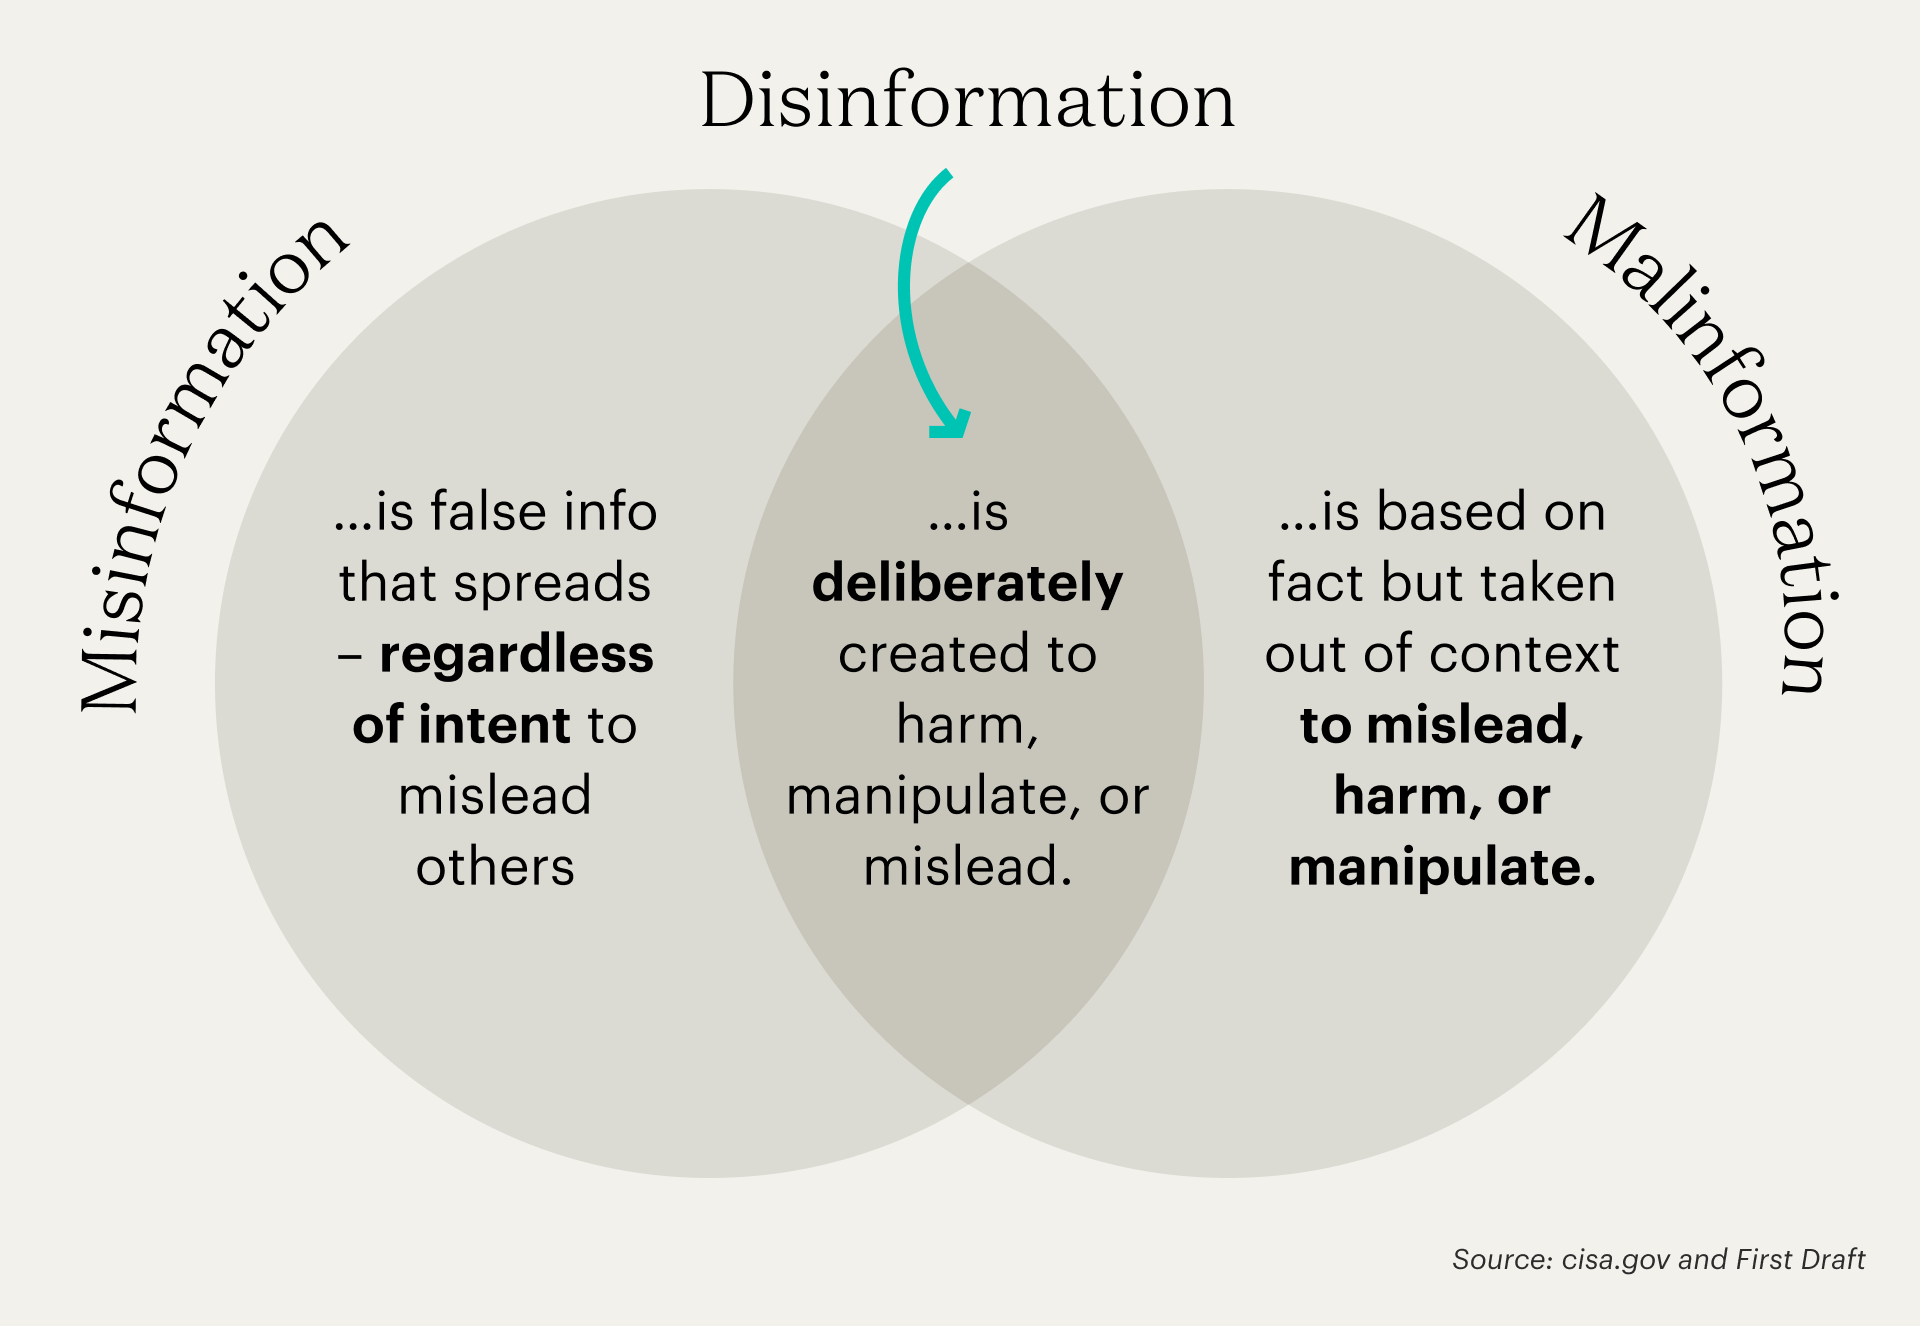 A Venn diagram explains the differences between misinformation, disinformation, and malinformatio